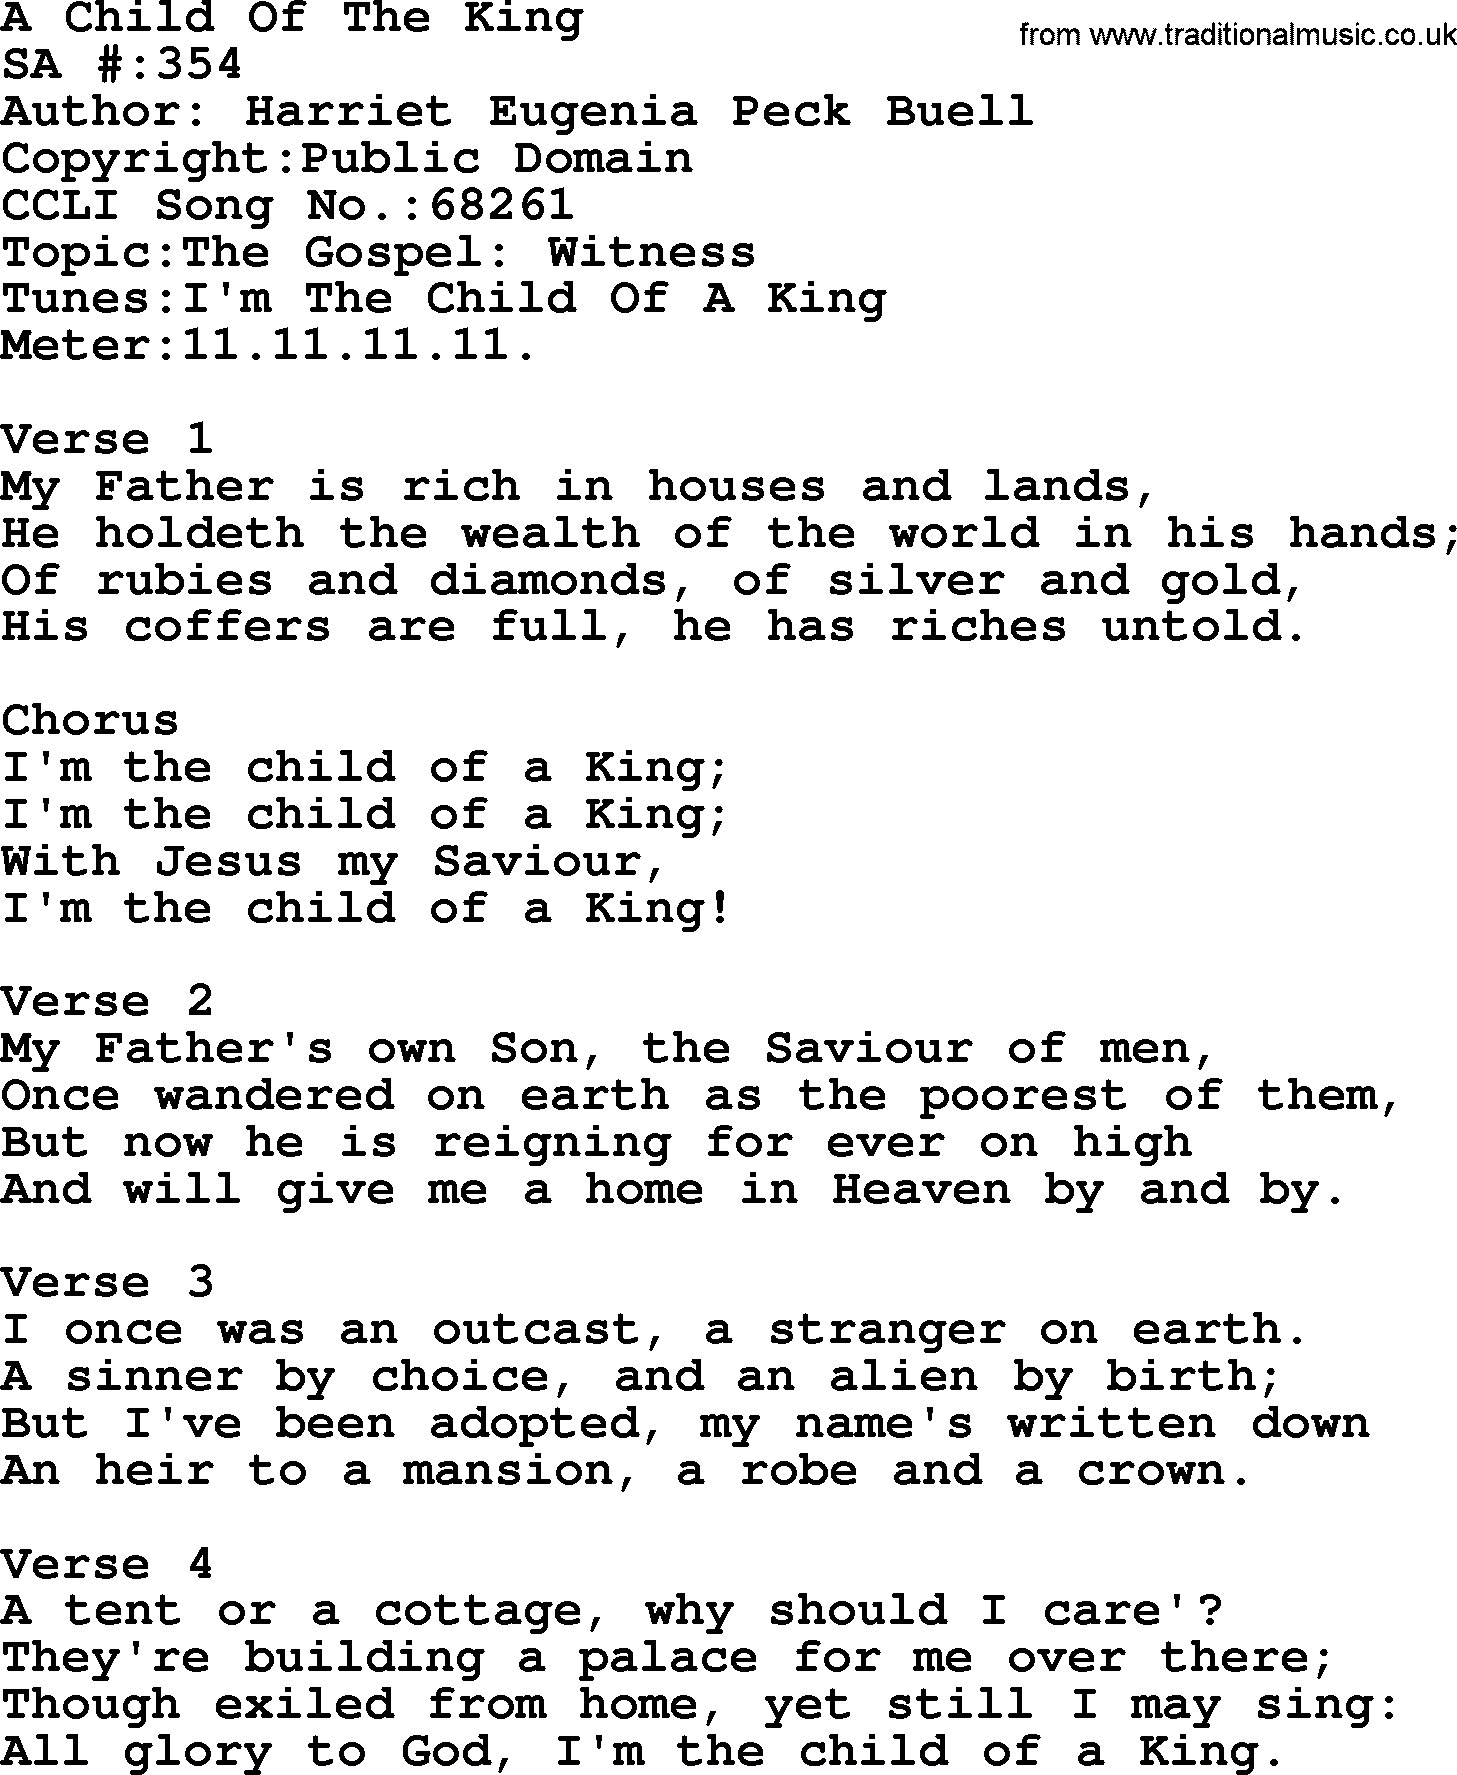 Salvation Army Hymnal, title: A Child Of The King, with lyrics and PDF,